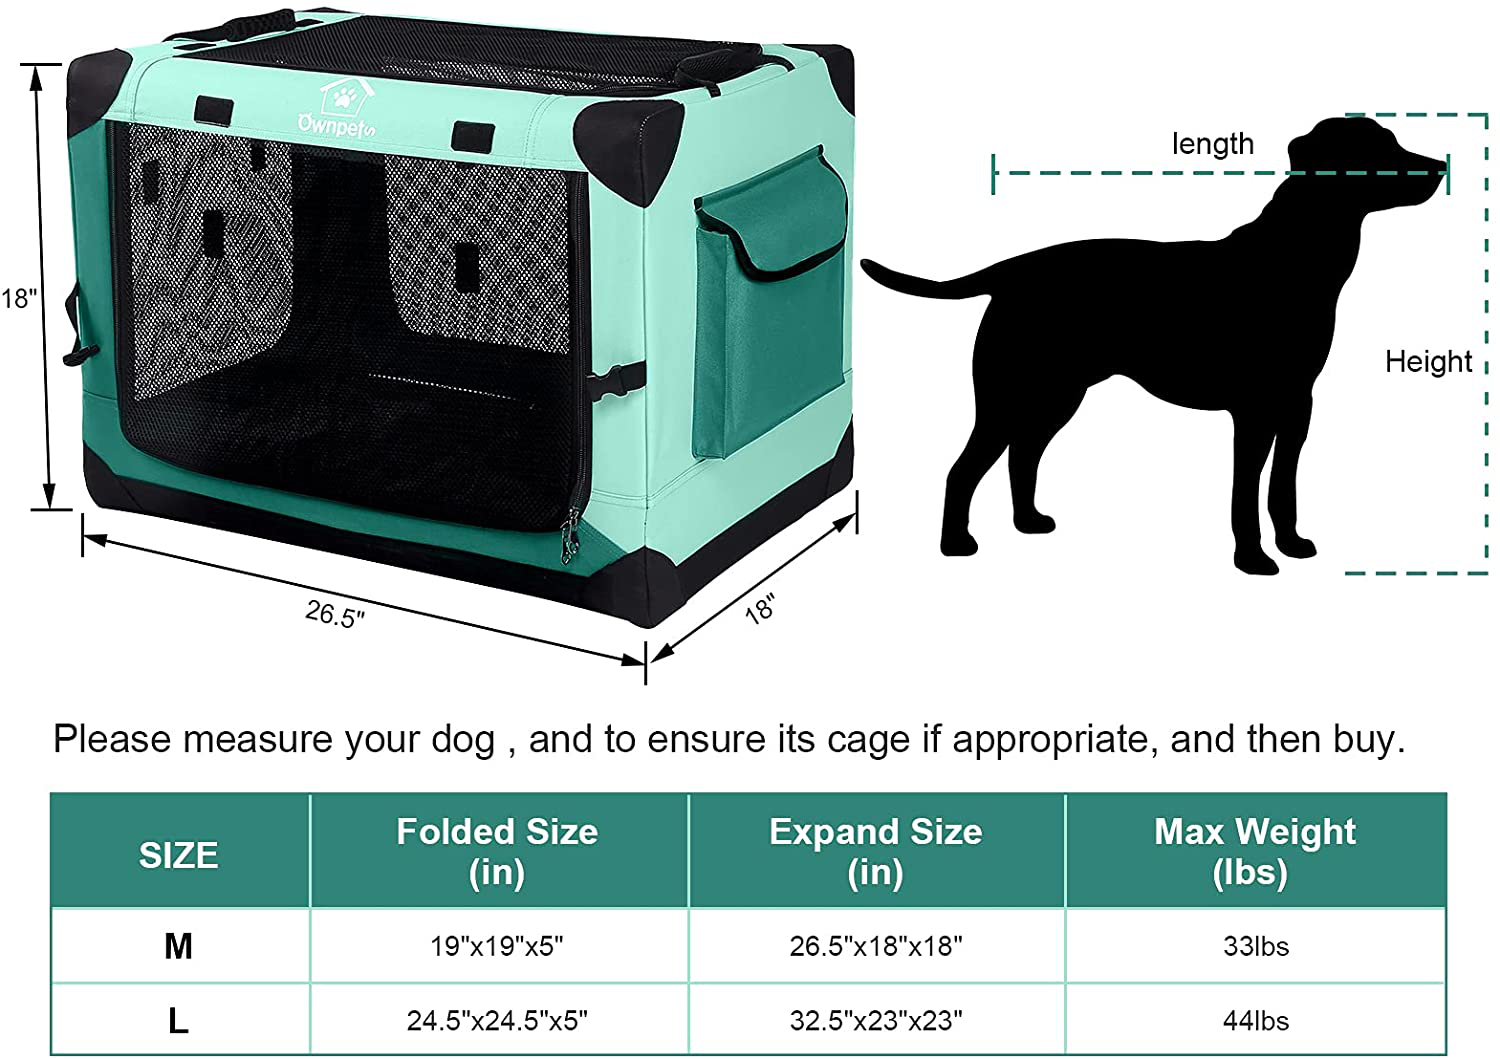 Ownpets 4 Door Dog Soft Crate Folding Portable Soft-Sided Crate with Strong Steel Frame and Mesh Mat for Indoor & Outdoor Travel Dog Crate